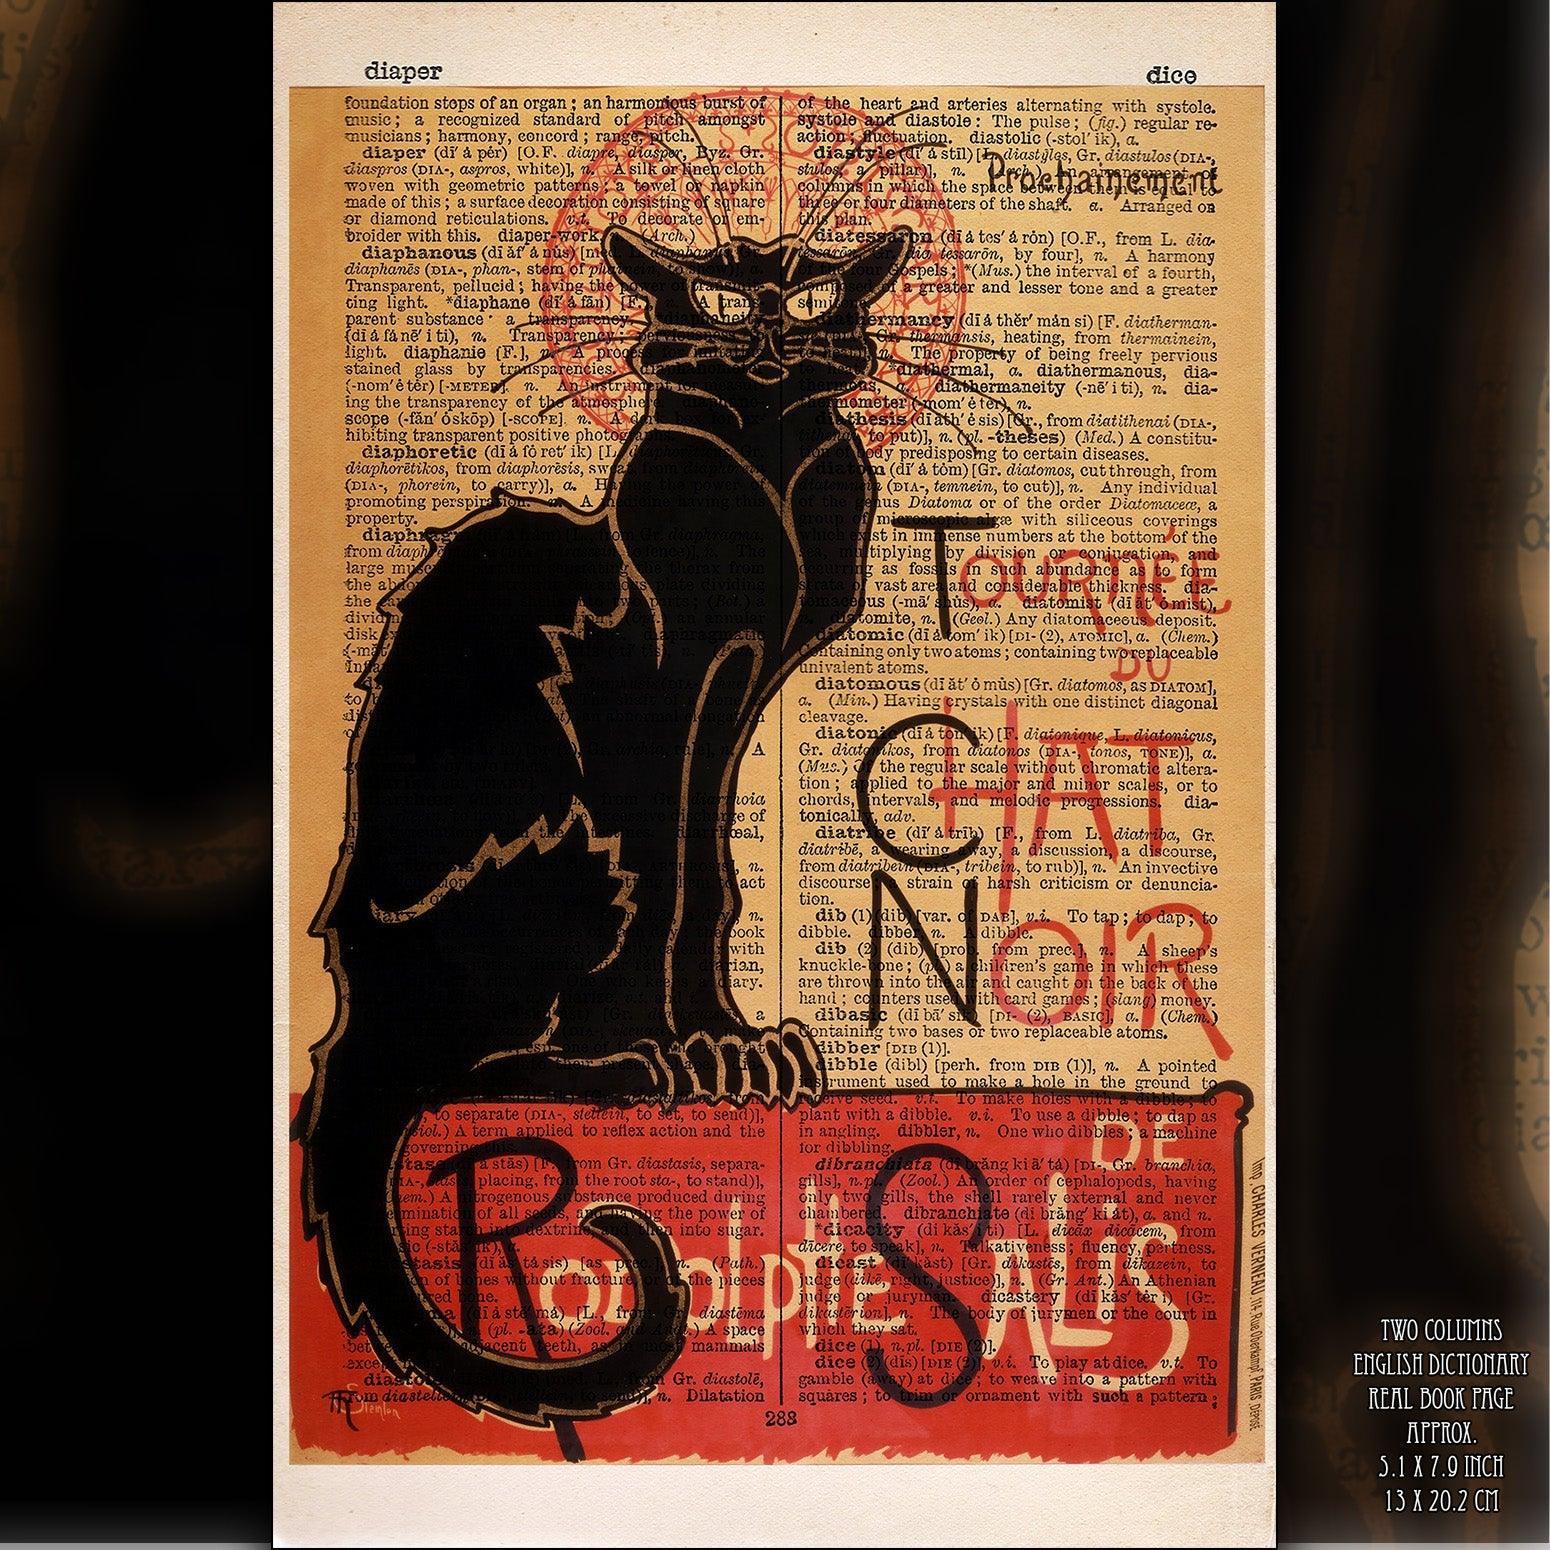 Give your home decor a touch of elegance through our exquisite Cabaret du Chat Noir reproduction poster. The artwork is a collage with the poster Cabaret du Chat Noir, Paris, poster designed by Théophile Alexandre Steinlen (Swiss graphic designer, 1859-1923 ). Year of created 1896.